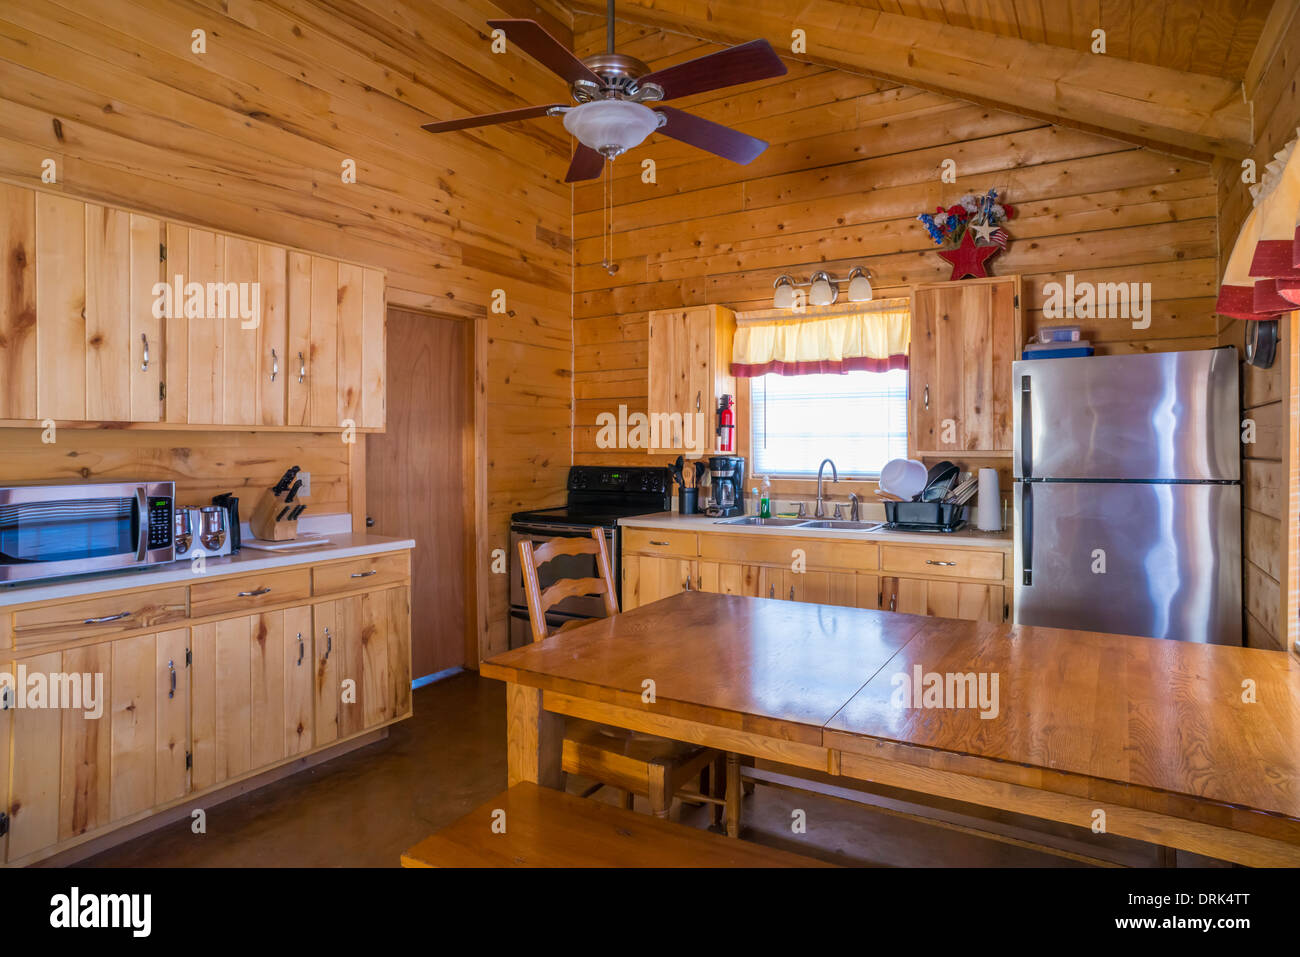 USA, Texas, rustic log home cabin interior with kitchen and dining area Stock Photo